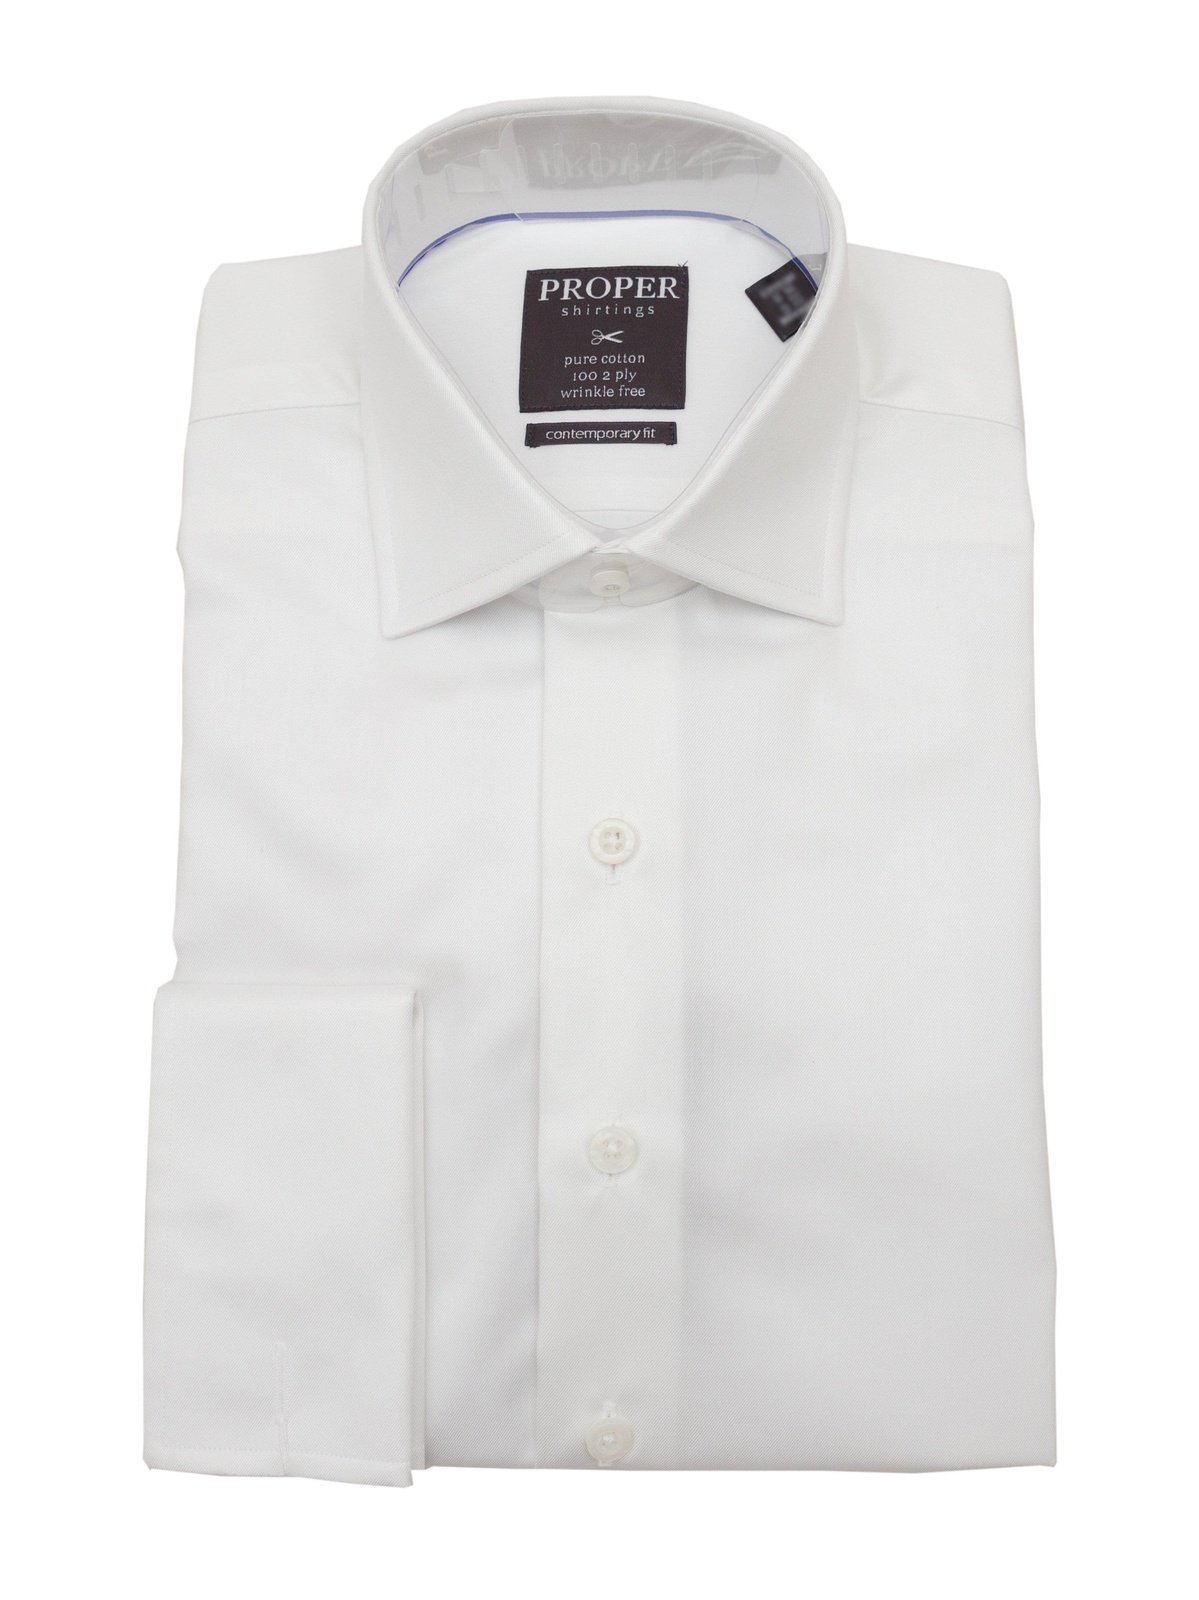 Brand P SHIRTS 14.5 / 32-33 Mens Cotton Solid White Slim Fit Spread Collar Wrinkle Free Dress Shirt